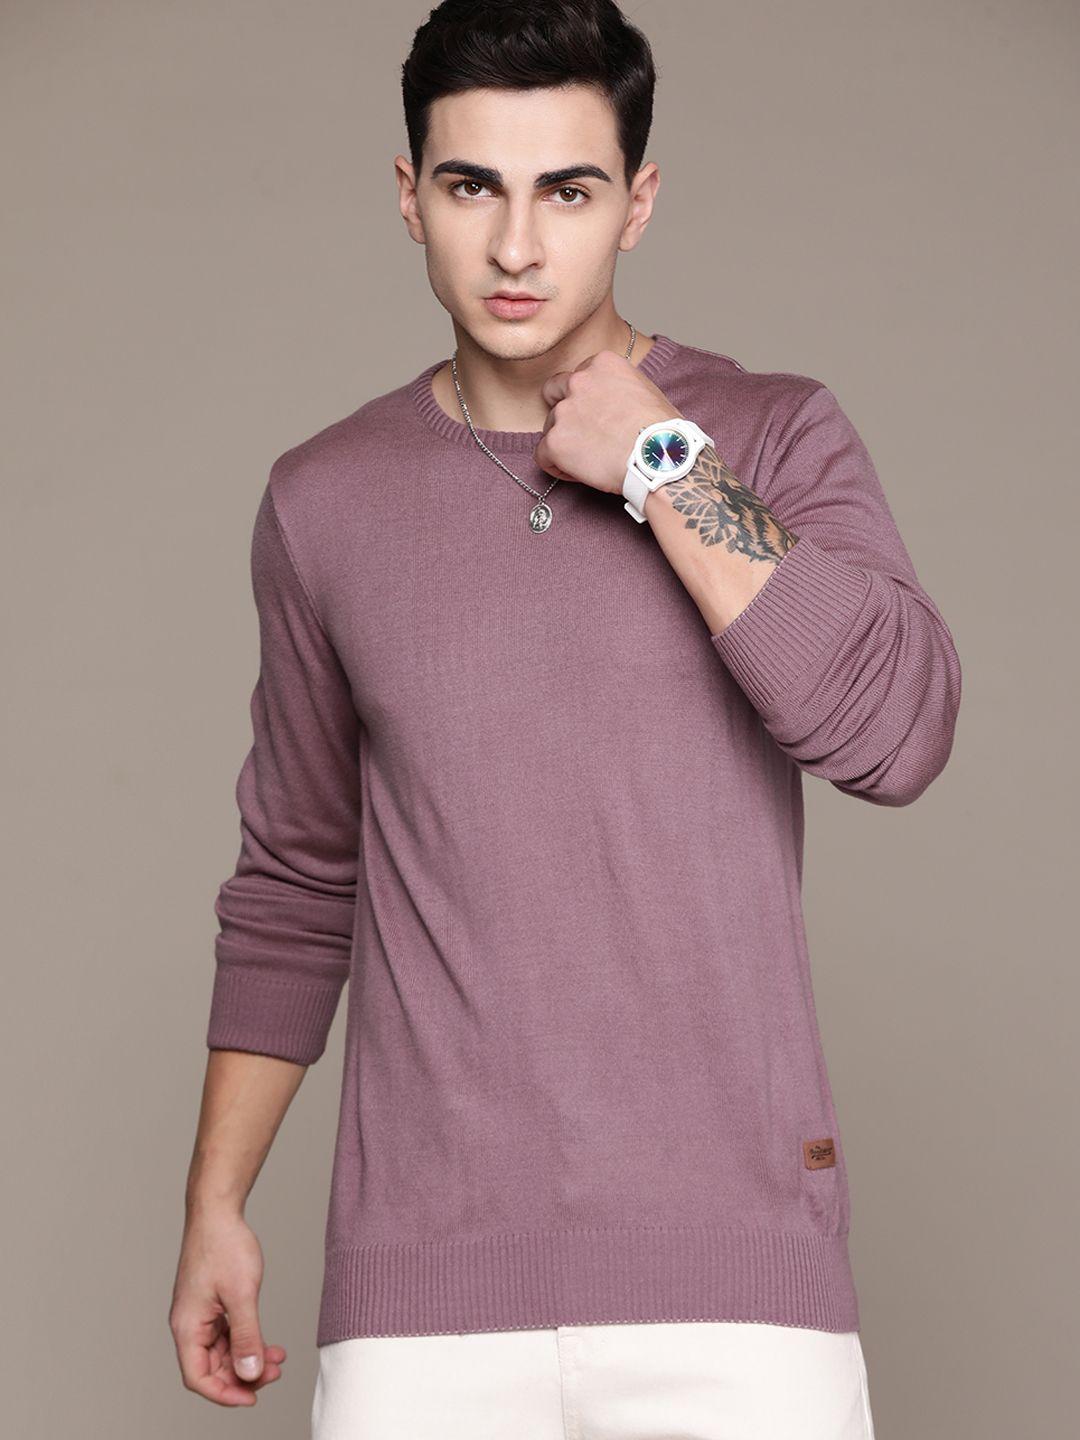 the roadster lifestyle co. acrylic round neck pullover